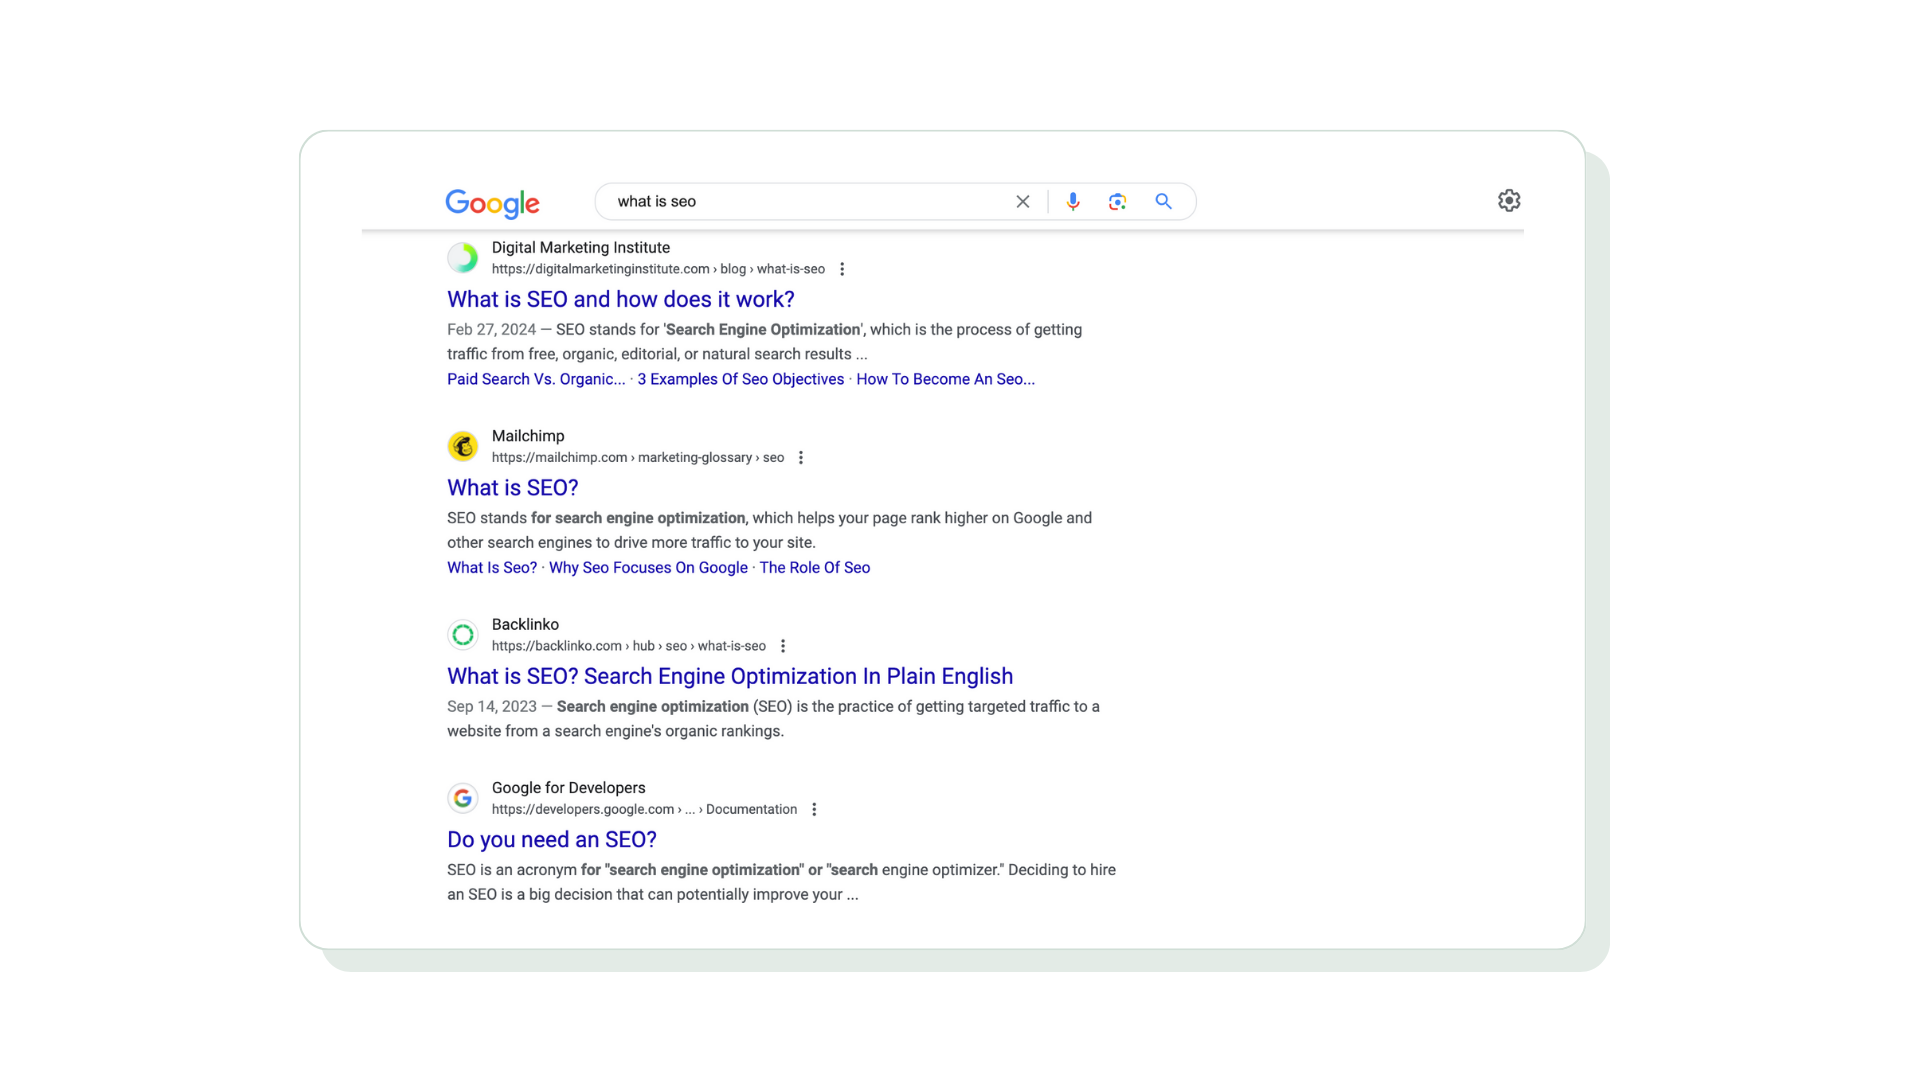 Screenshot of a search query for what is SEO showing multiple blue links on the SERP